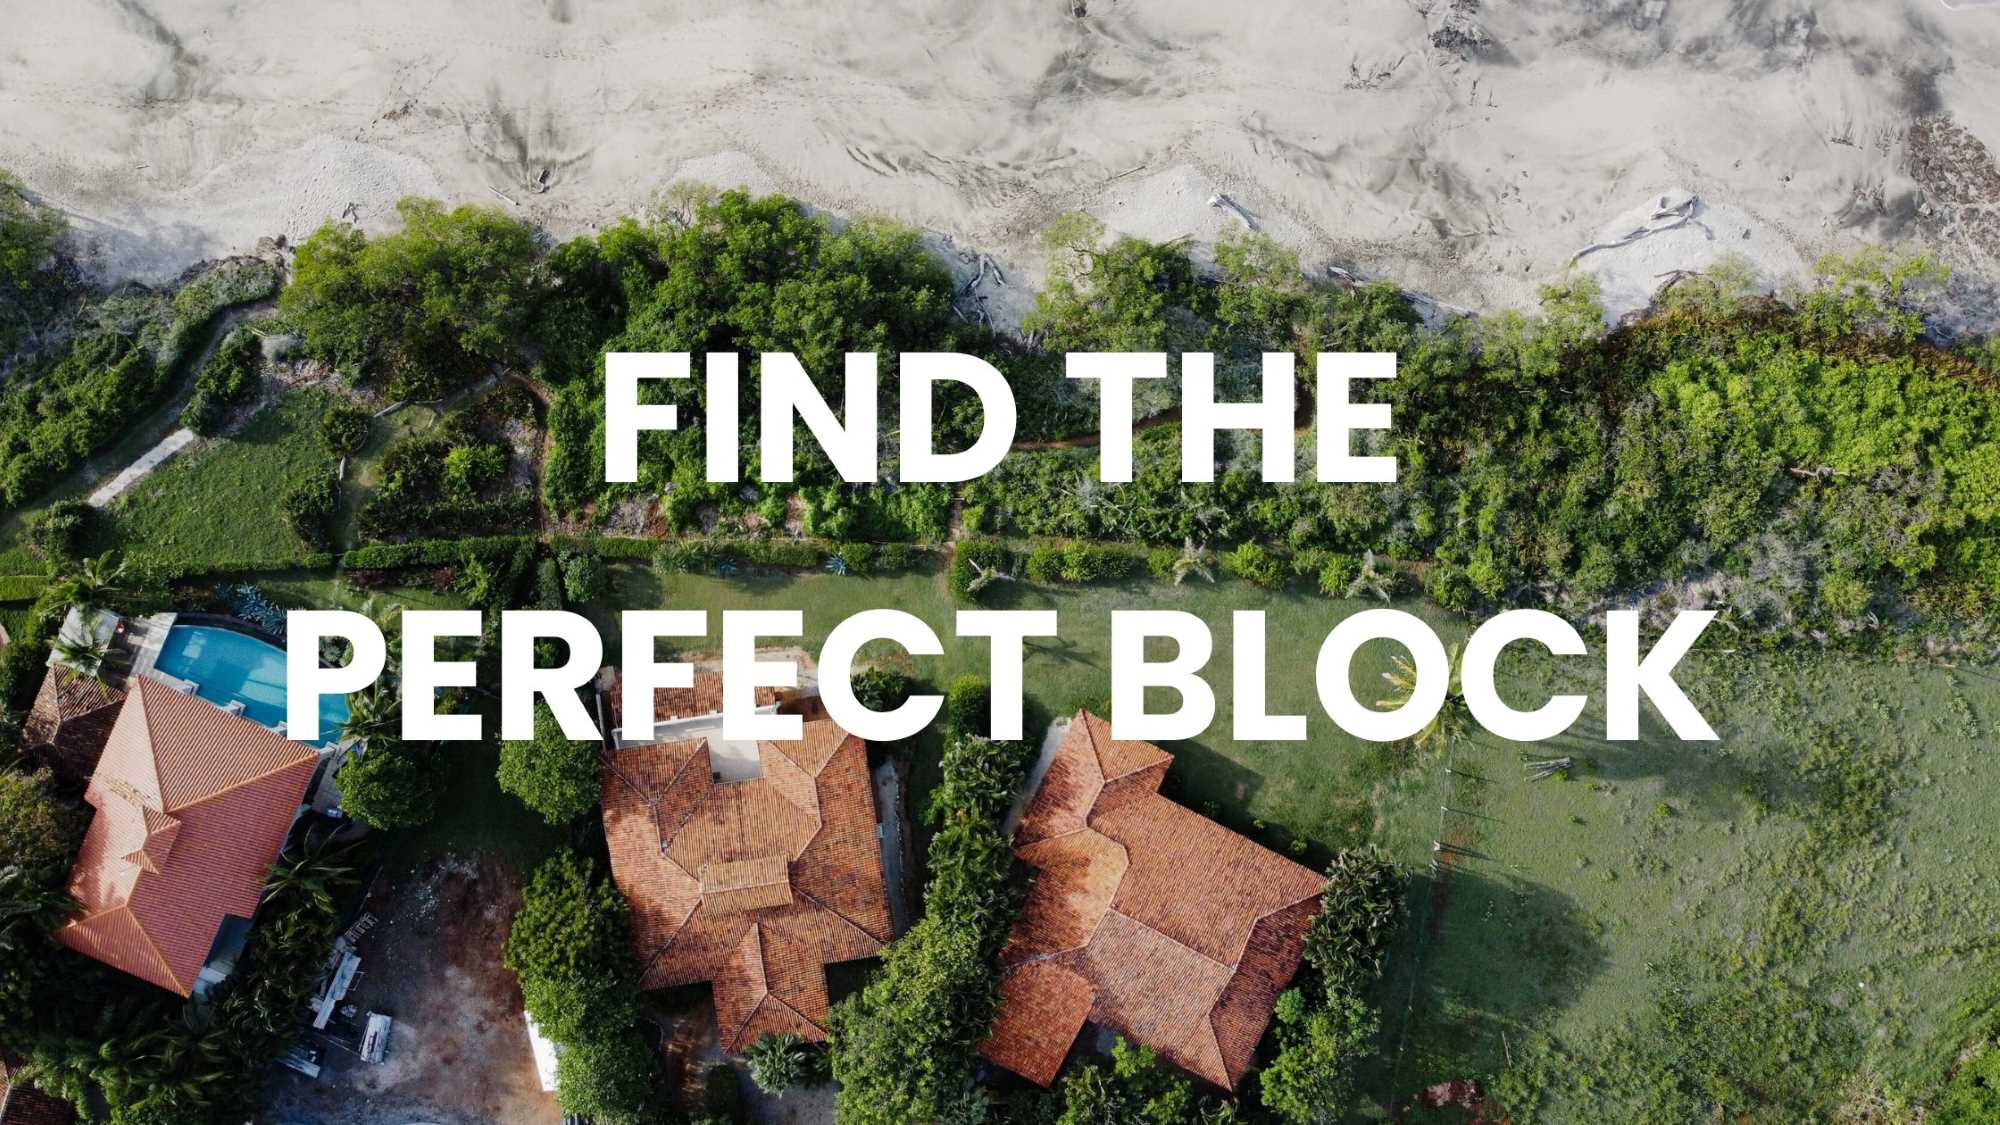 "FIND THE PERFECT BLOCK" over aerial beachside view of land plots, some with houses.